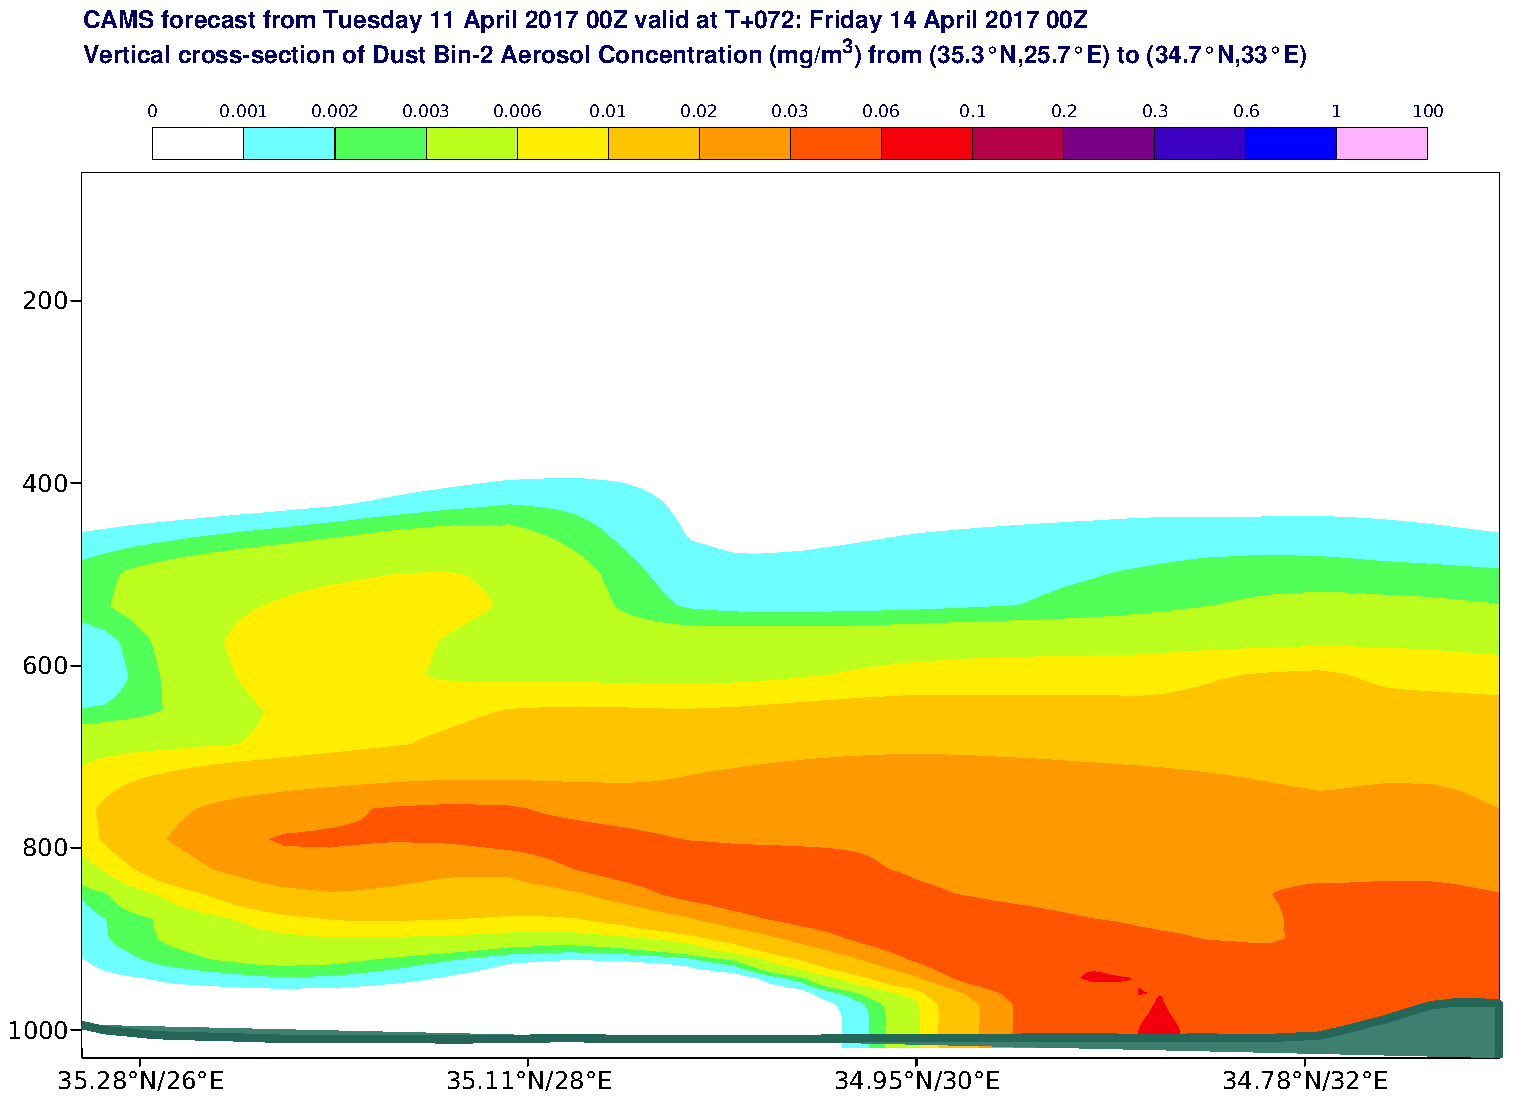 Vertical cross-section of Dust Bin-2 Aerosol Concentration (mg/m3) valid at T72 - 2017-04-14 00:00